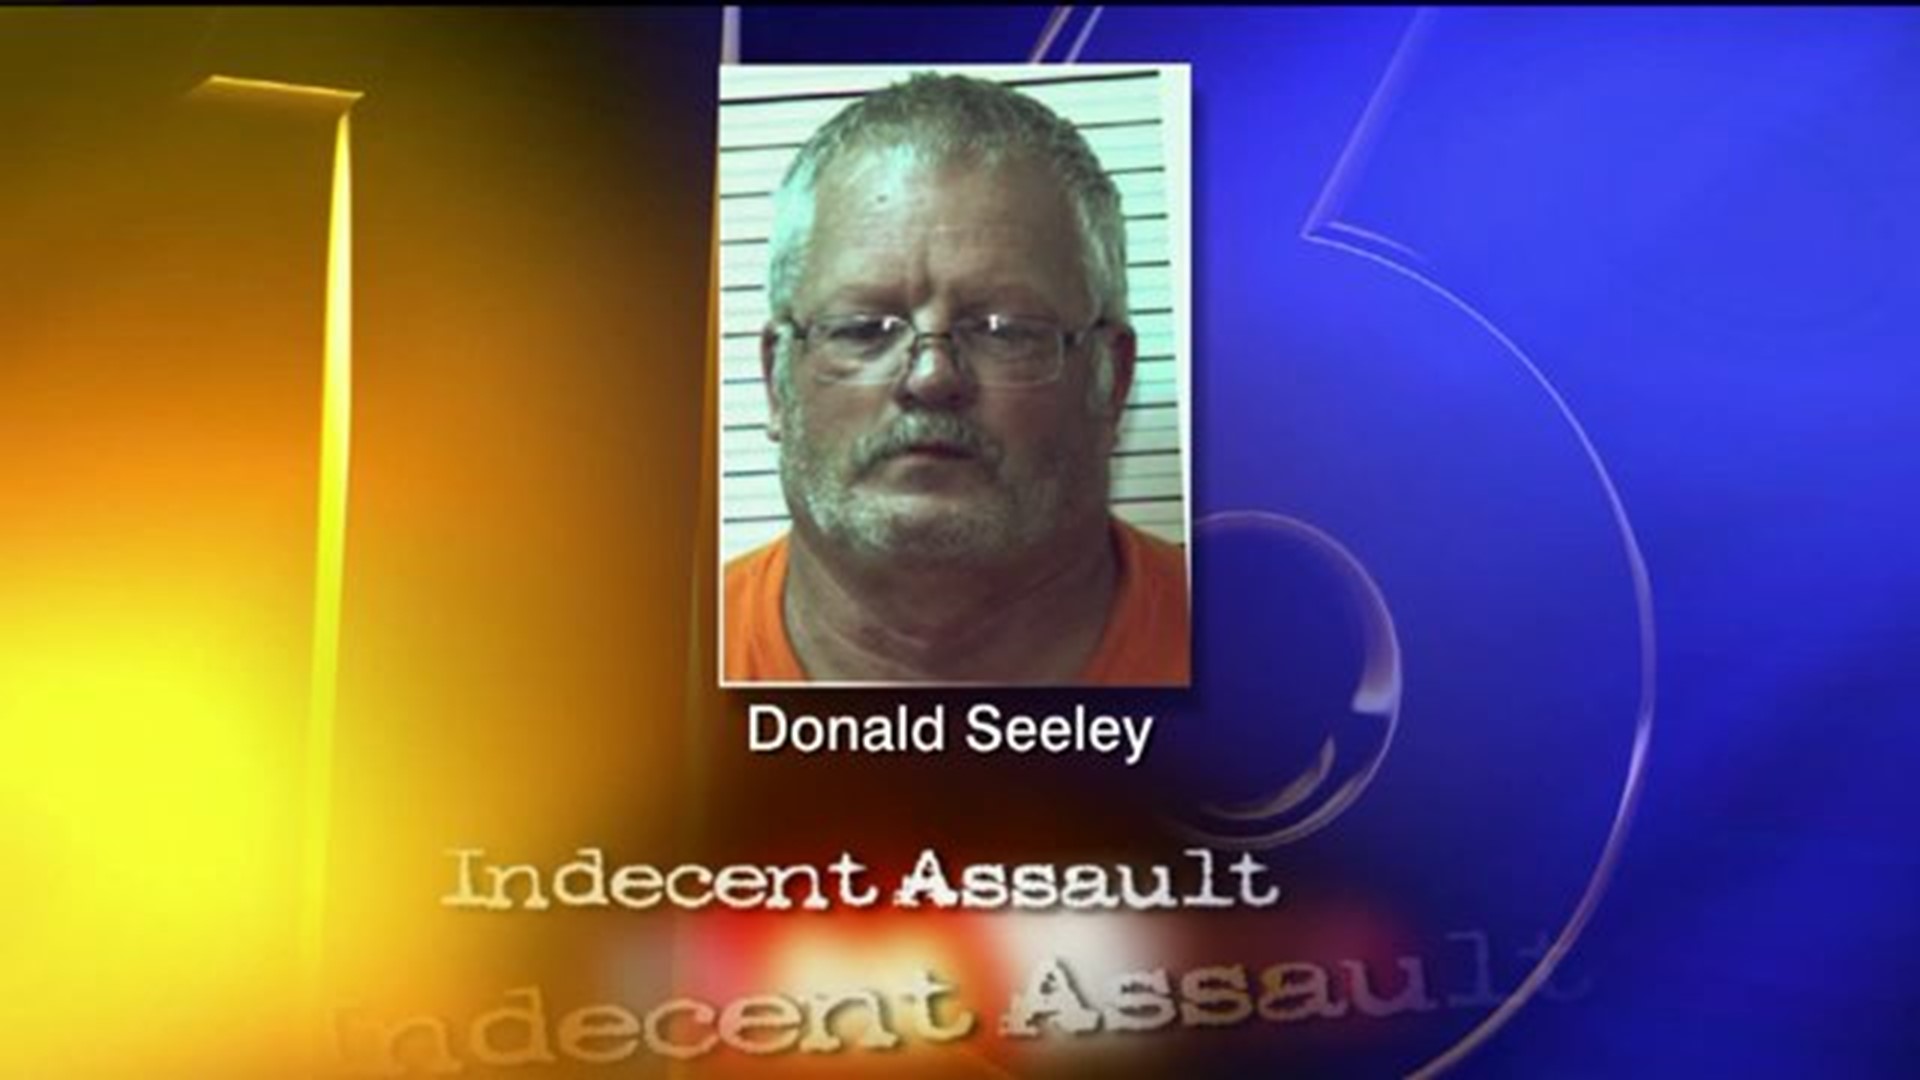 Bradford County Man Faces Sex Charges